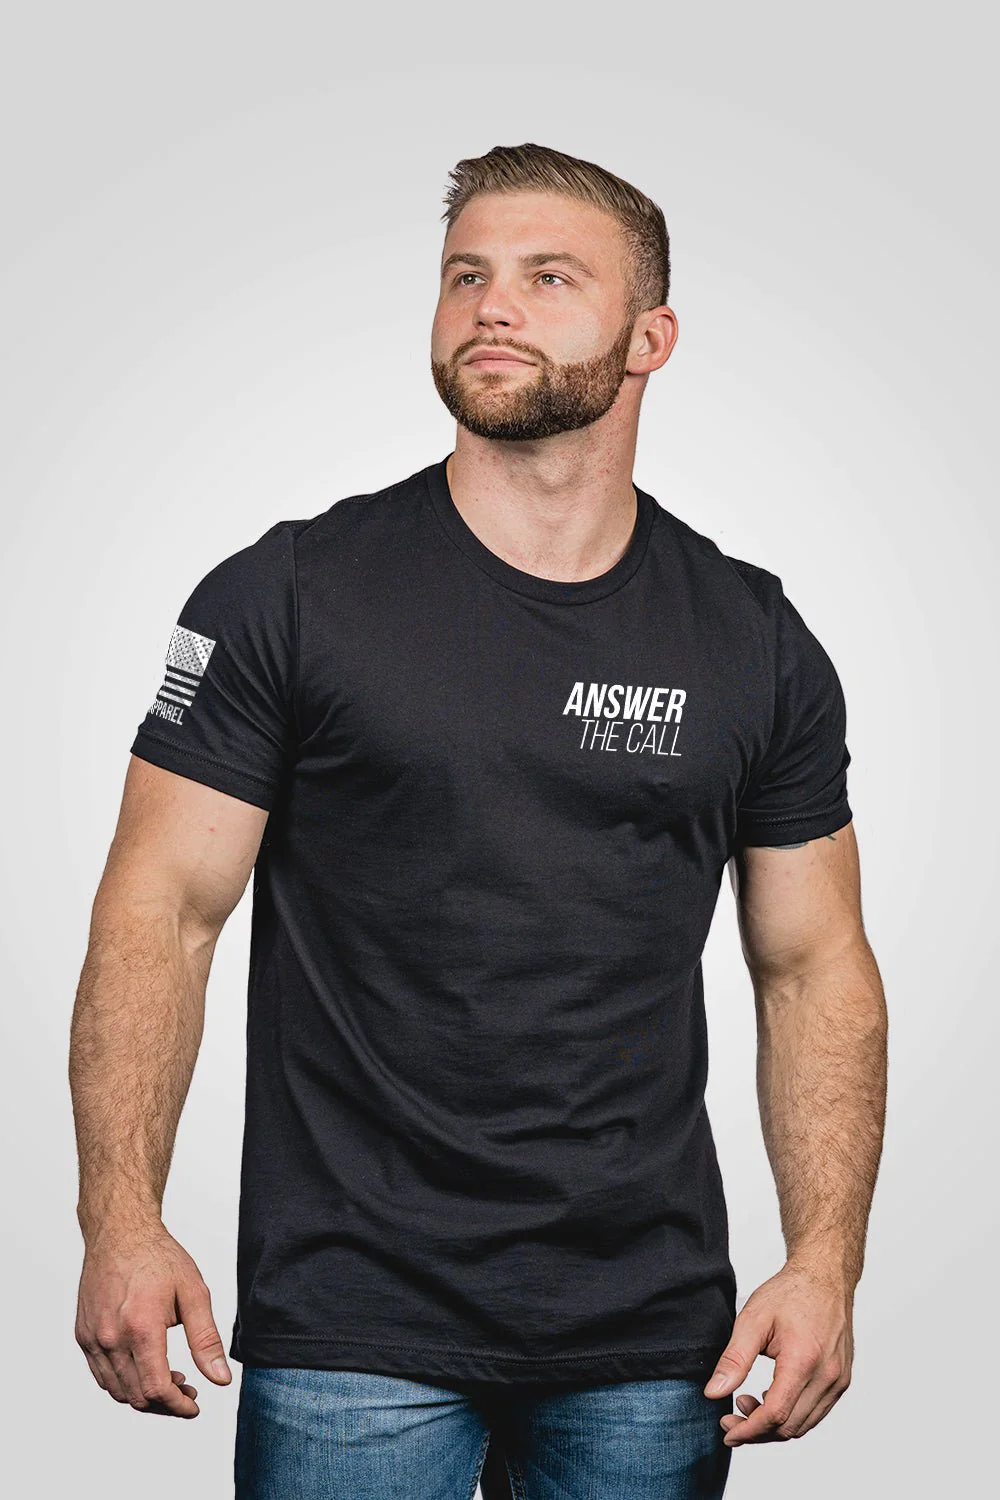 Nine Line Men's T-Shirt - Answer The Call posted by ProdOrigin USA in Men's Apparel